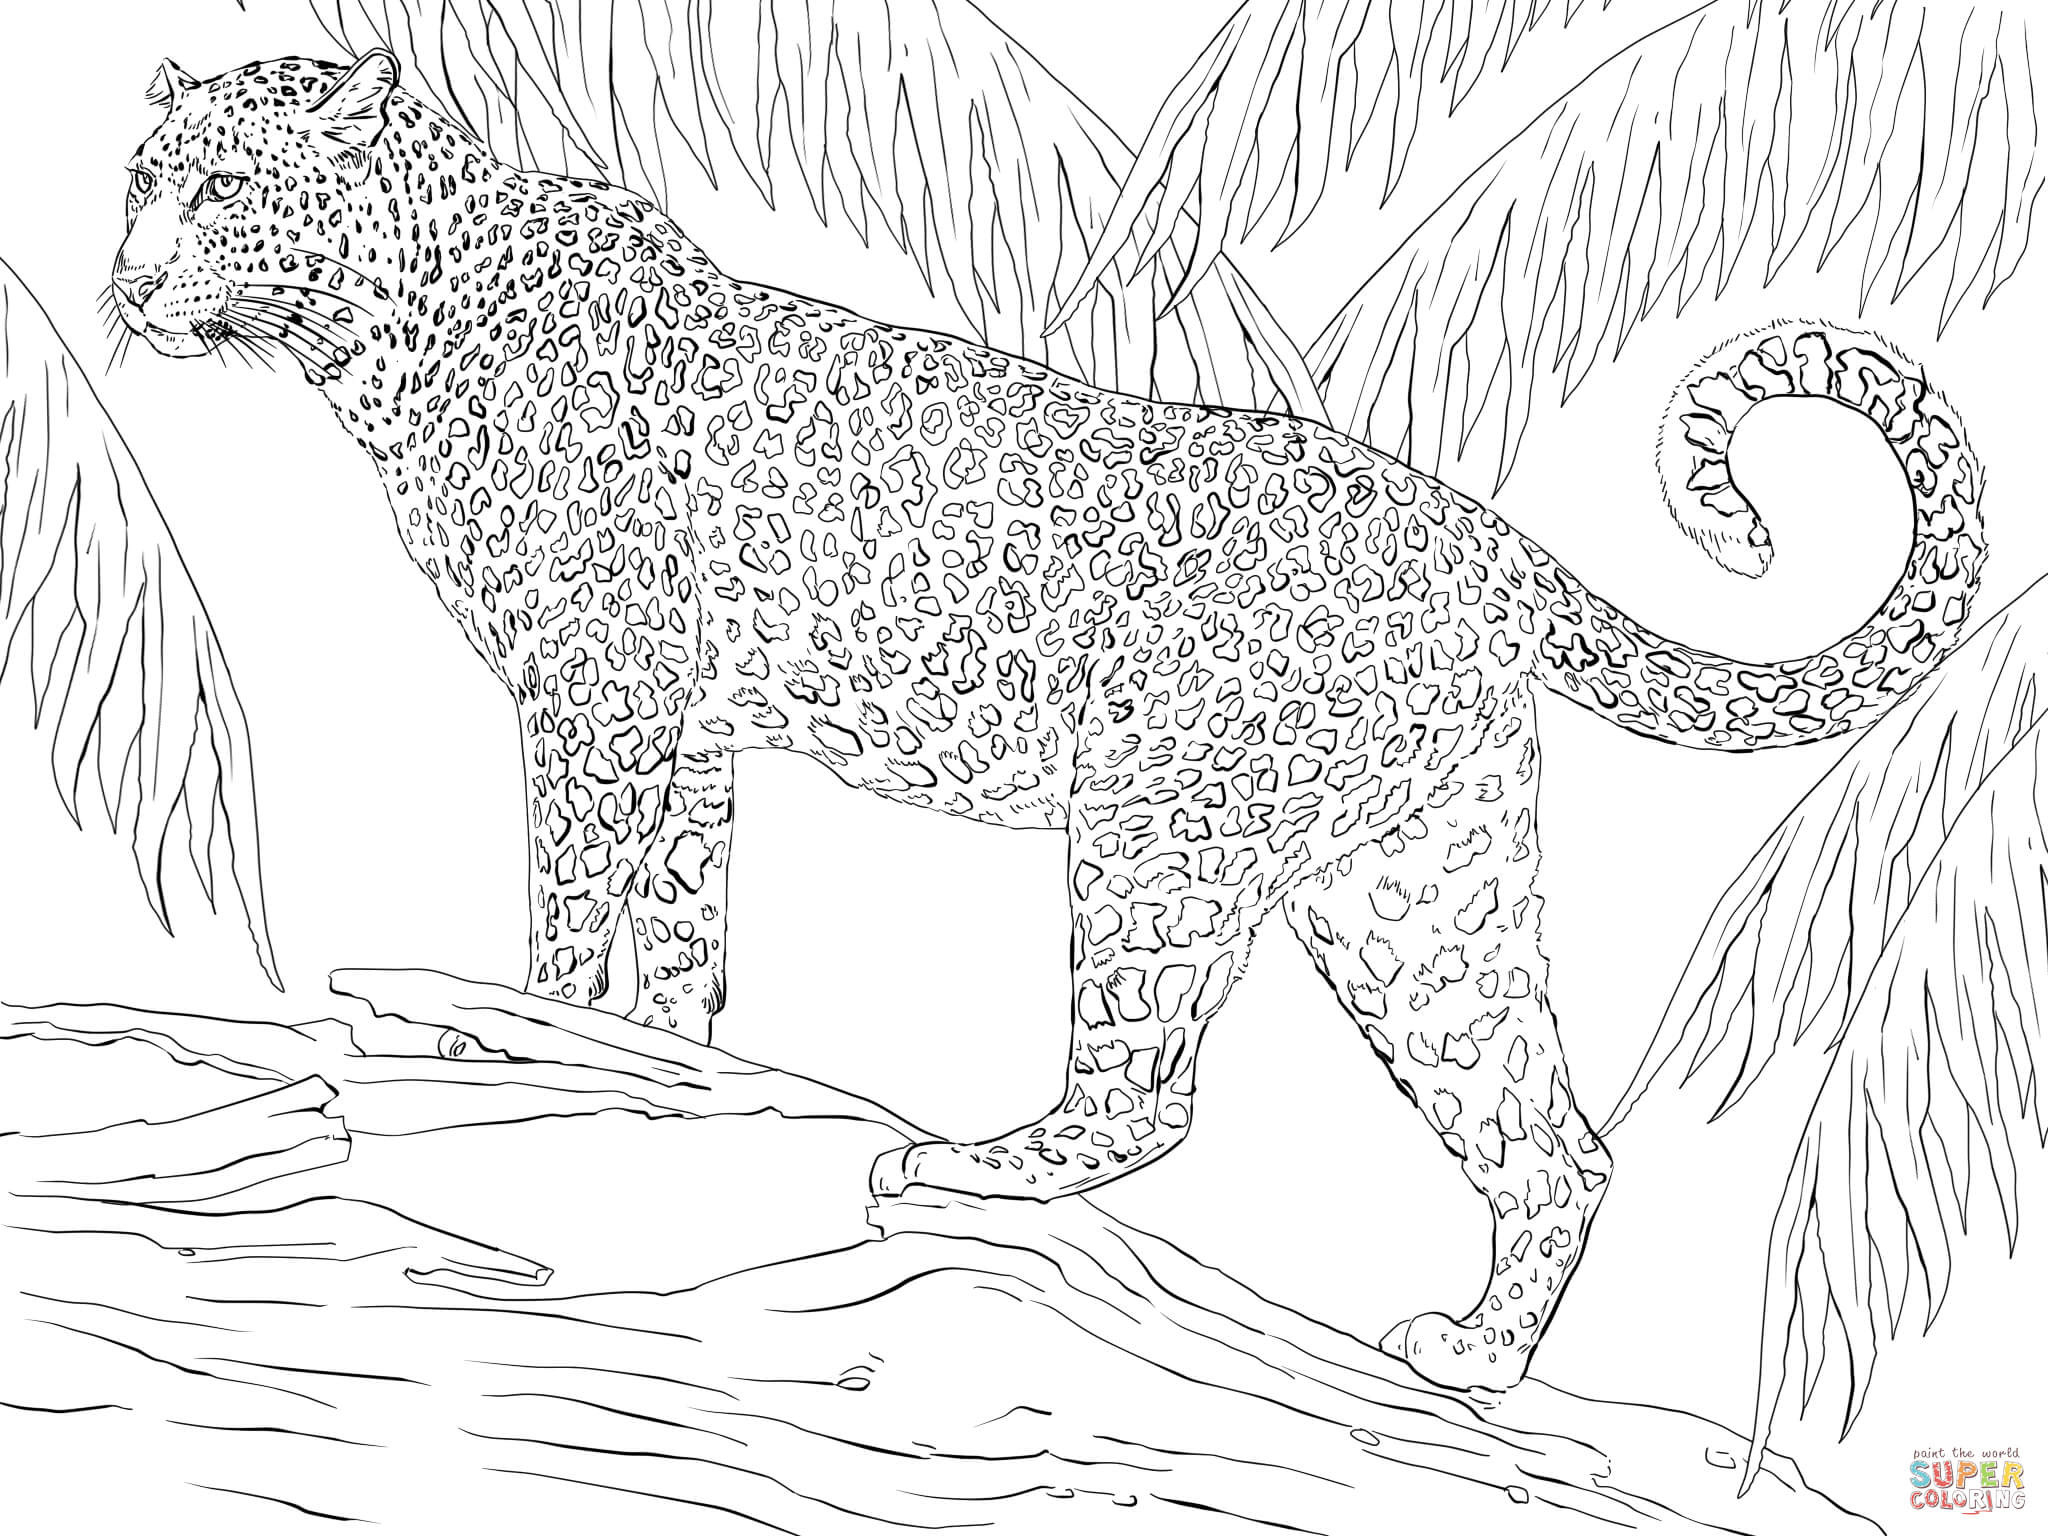 Animals In The Rainforest Coloring Pages Jaguar Coloring Page On Rainforest Animals Pages Coloring Pages